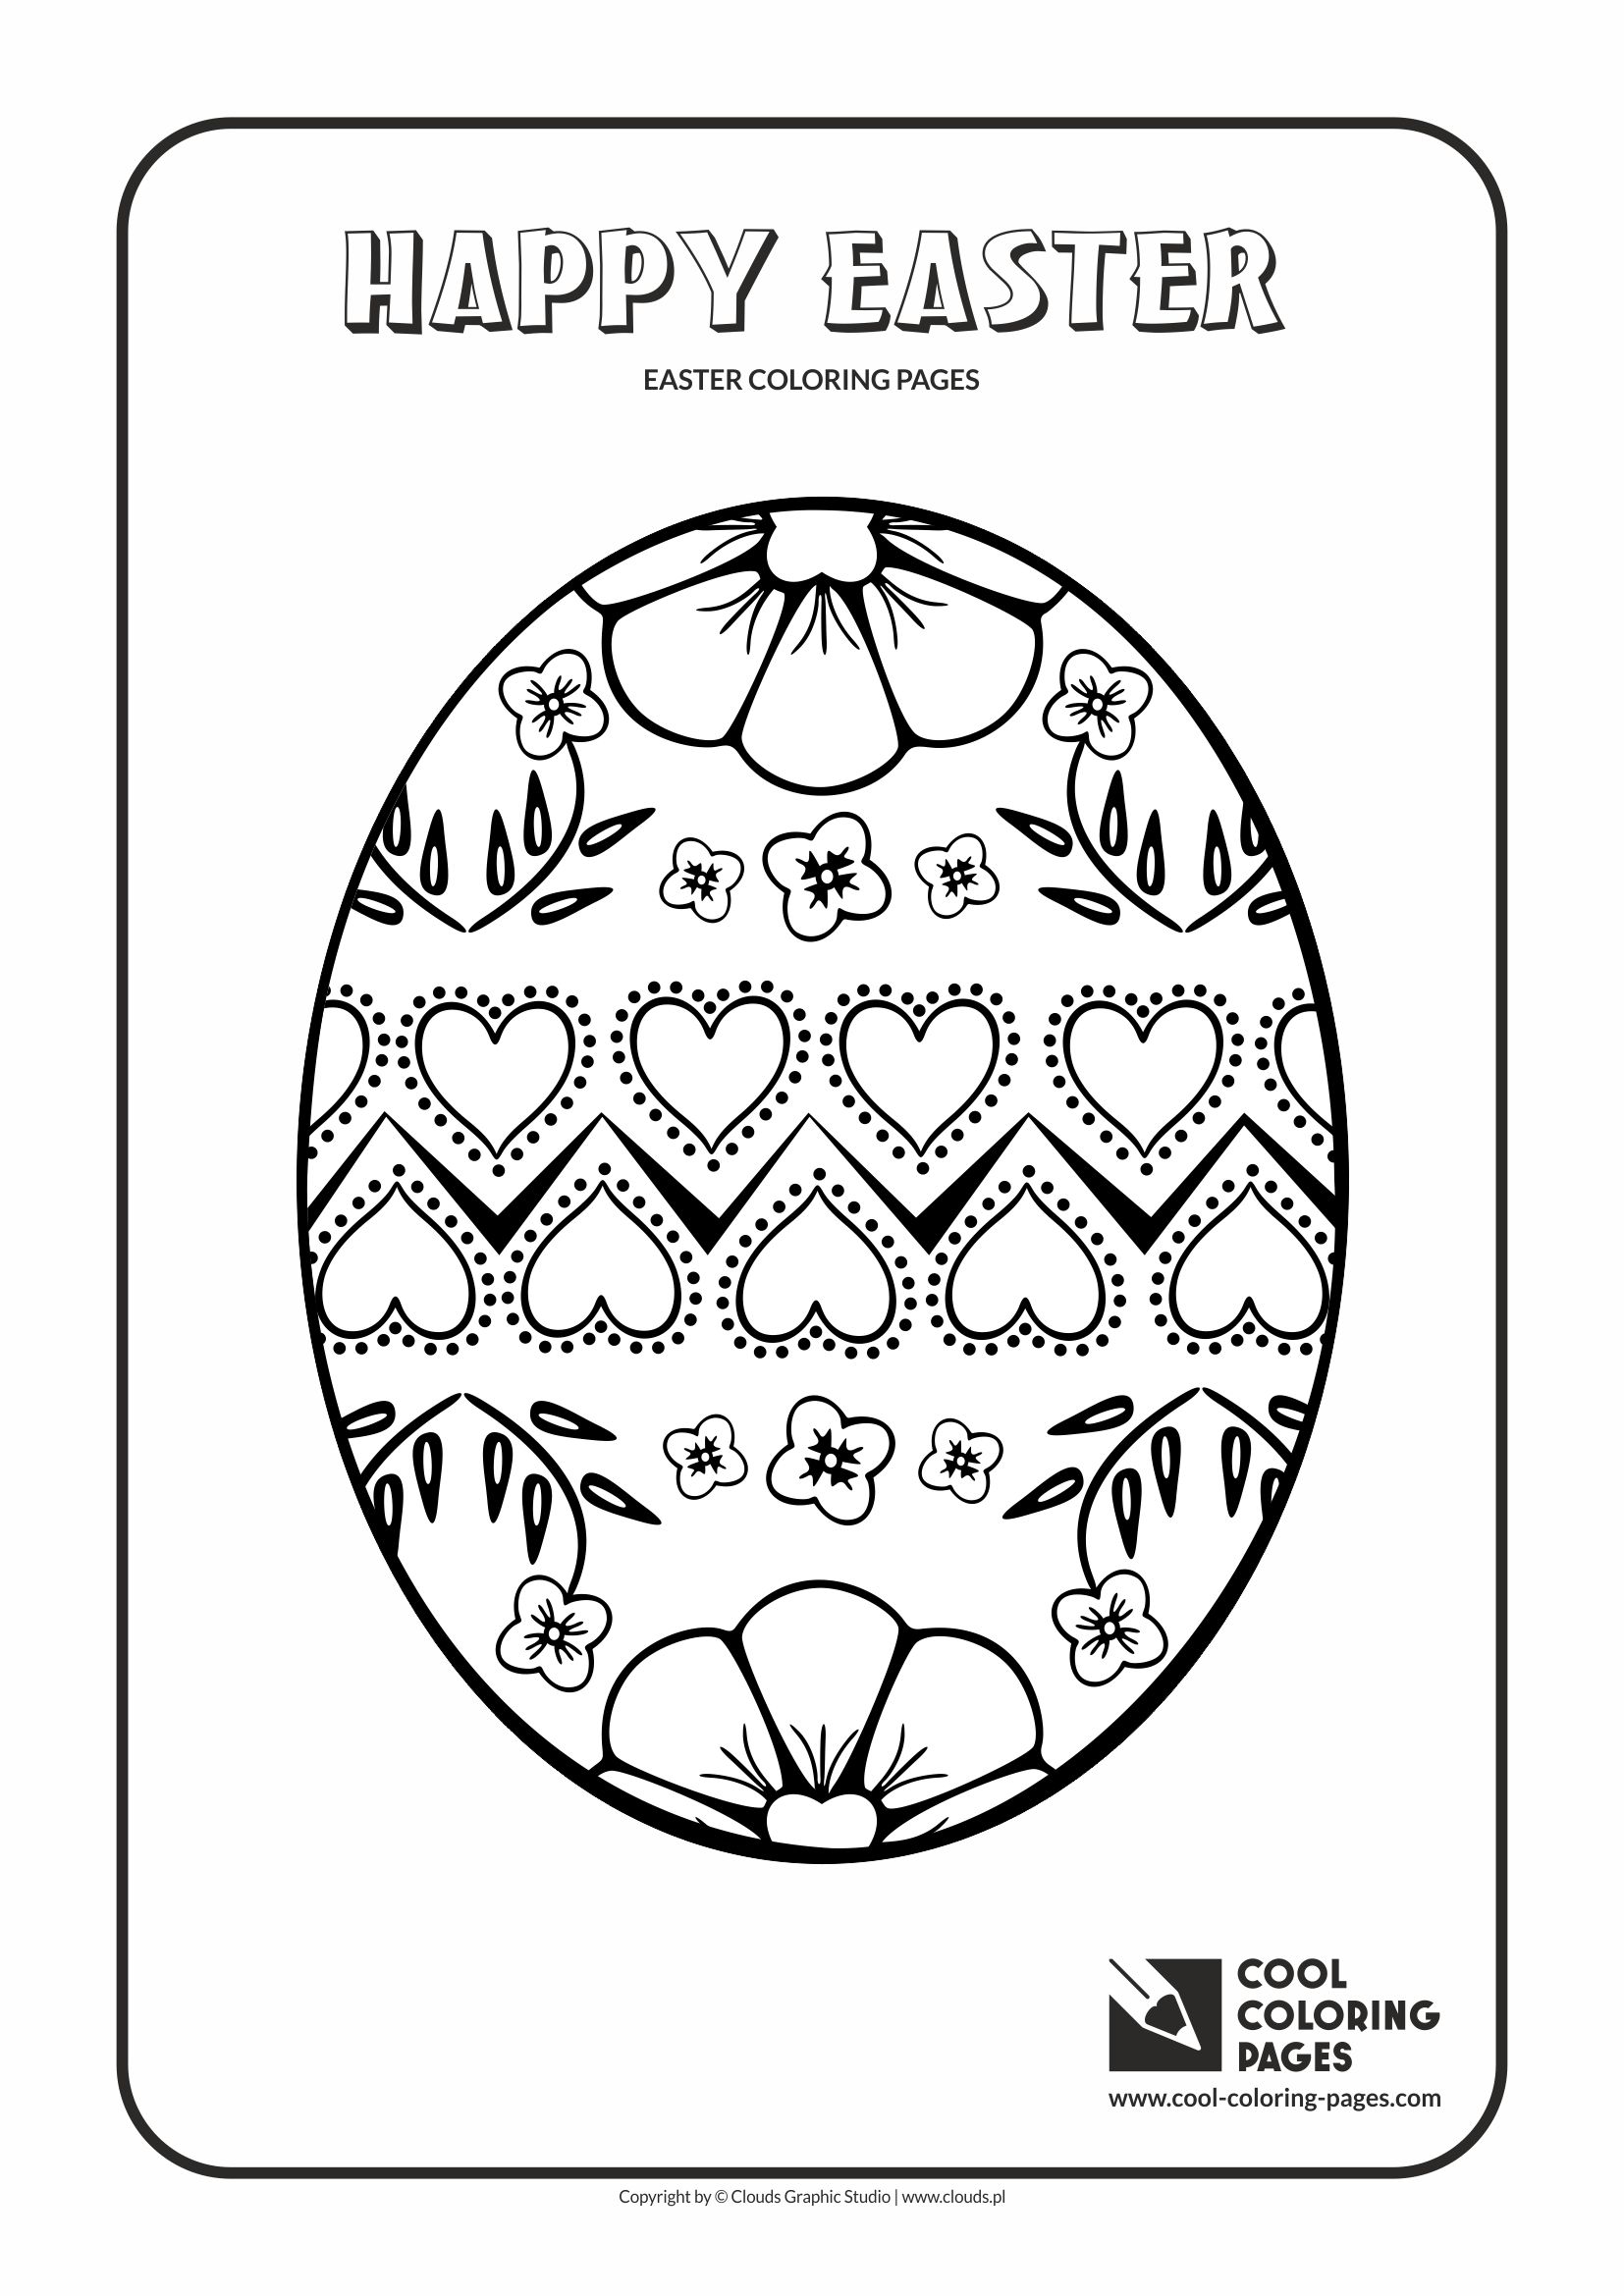 Cool Coloring Pages Easter egg no 4 coloring page - Cool Coloring Pages